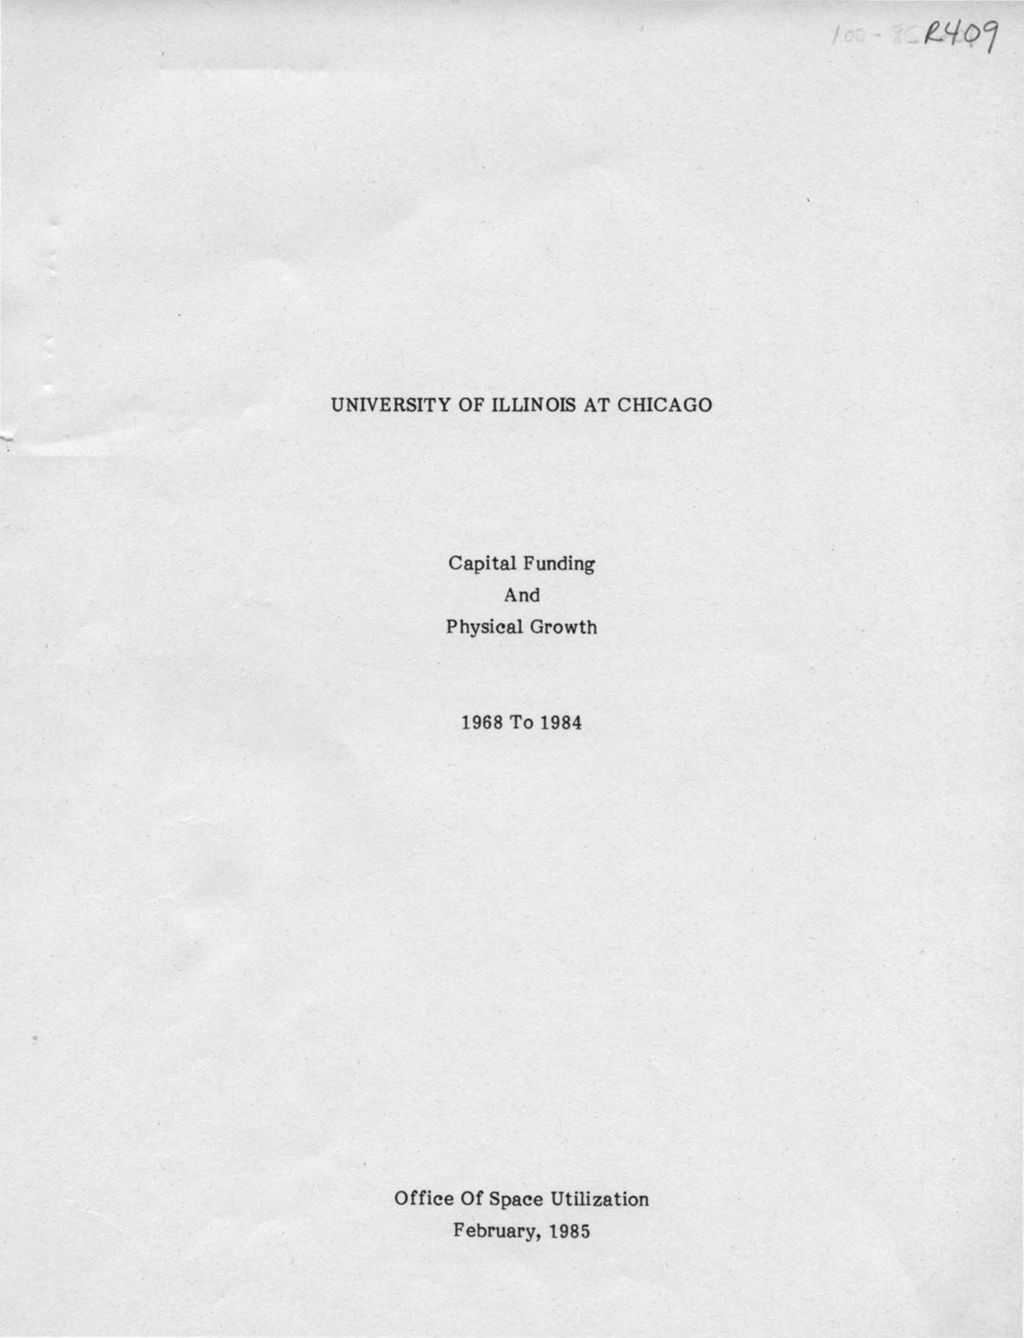 Miniature of University of Illinois at Chicago, Capital Funding and Physical Growth, 1968 To 1984 (PDF version)